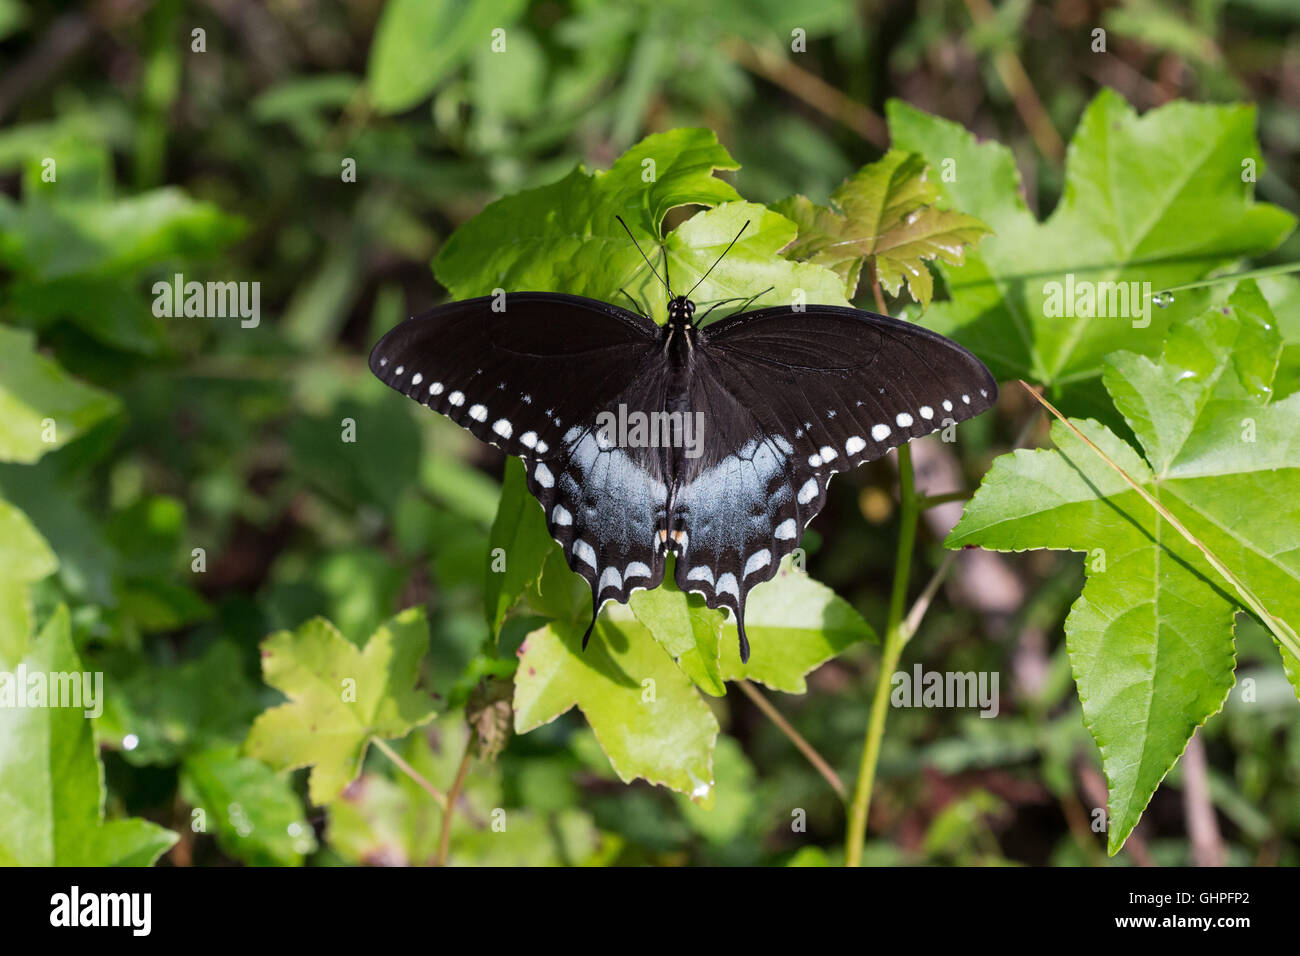 A male Spicebush Swallowtail butterfly (Papilio troilus) basking on a maple sapling at Big Oaks National Wildlife Refuge, Indiana, United States Stock Photo